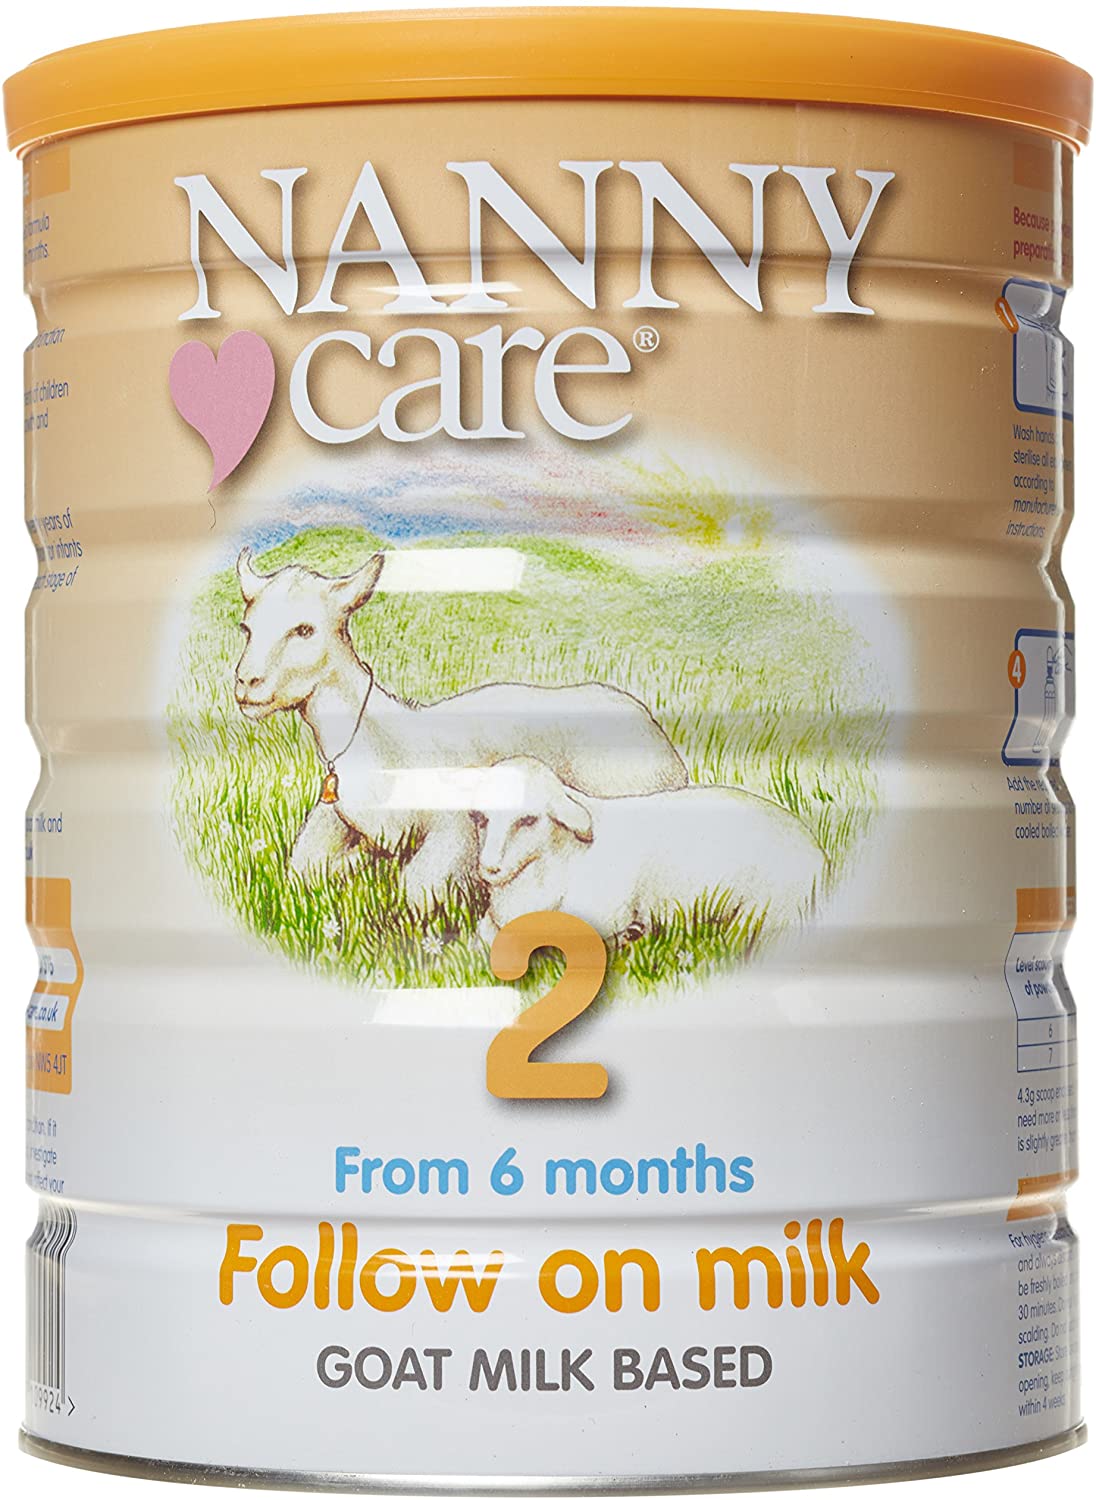 Nanny care 1 First Milk PDR 400g